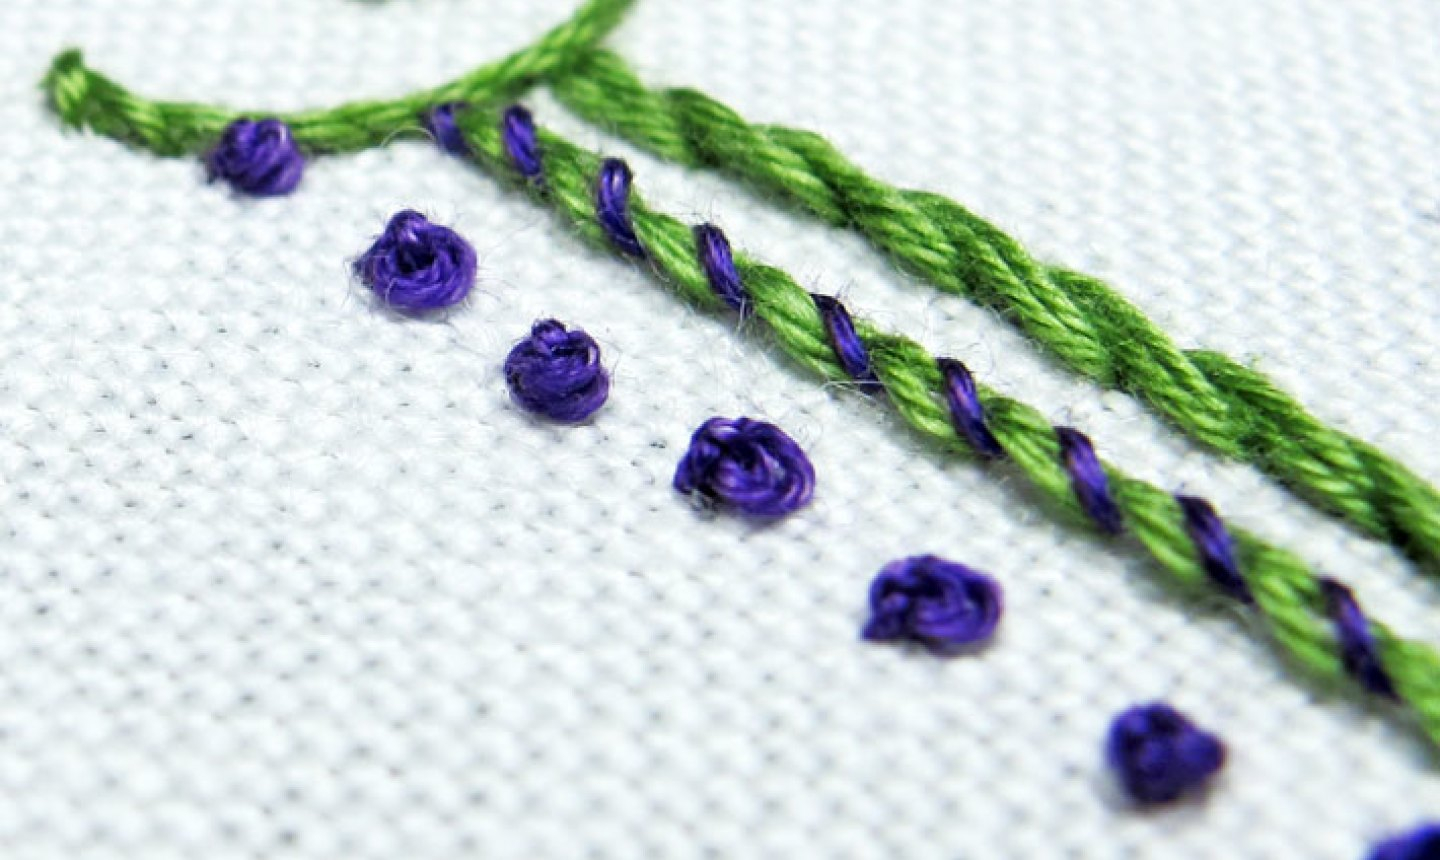 French Knot Embroidery Patterns How To Start Embroidery Threads Without A Knot